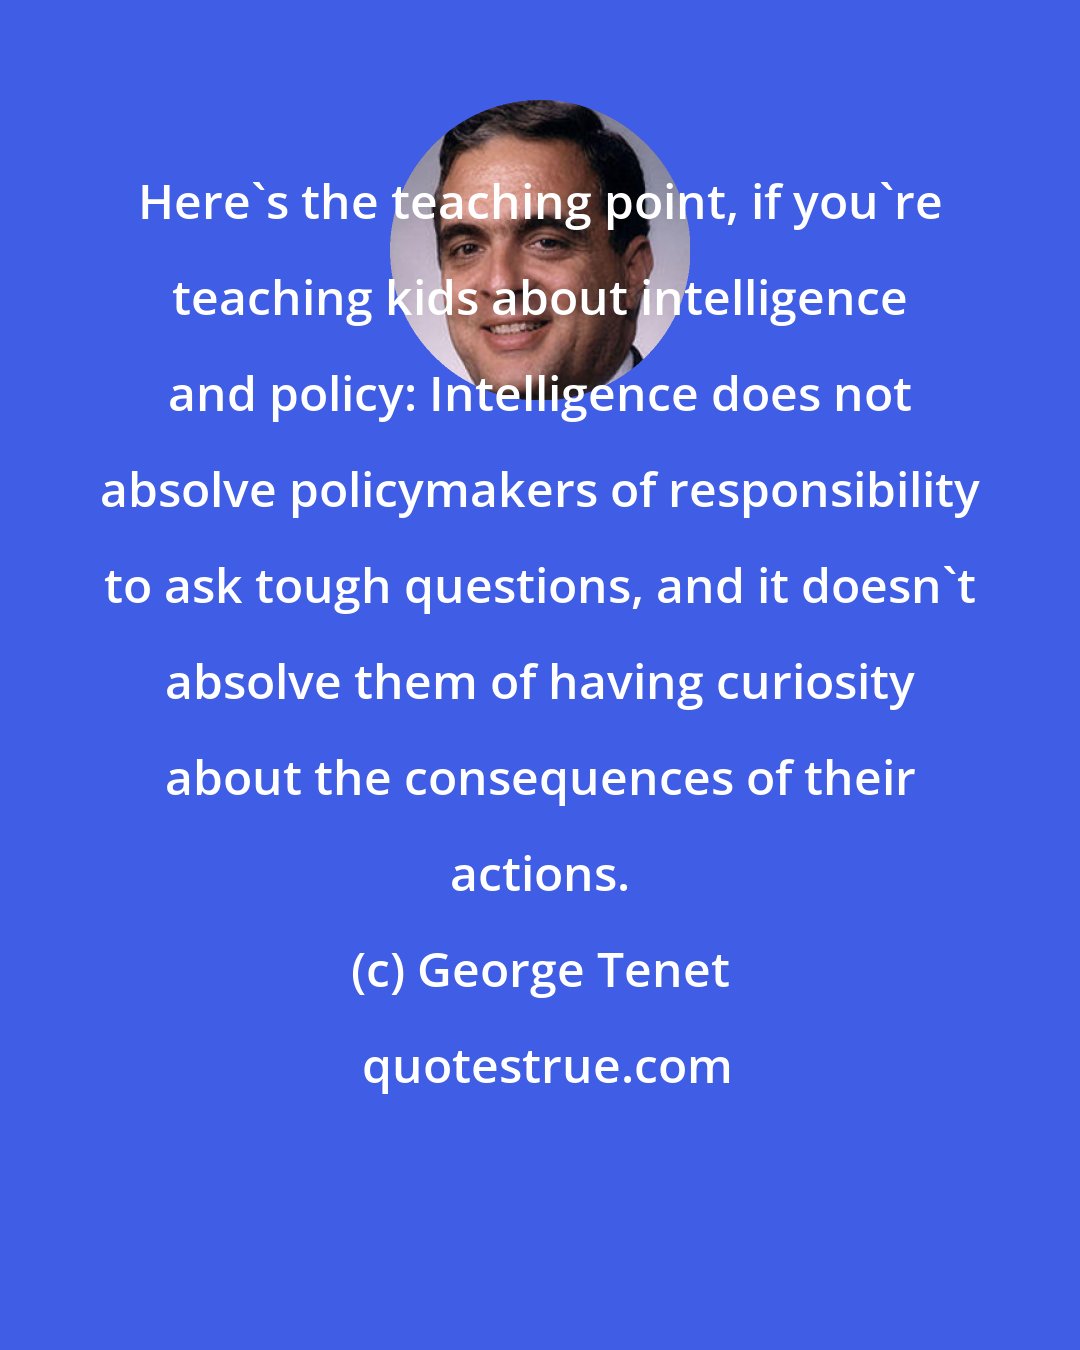 George Tenet: Here's the teaching point, if you're teaching kids about intelligence and policy: Intelligence does not absolve policymakers of responsibility to ask tough questions, and it doesn't absolve them of having curiosity about the consequences of their actions.